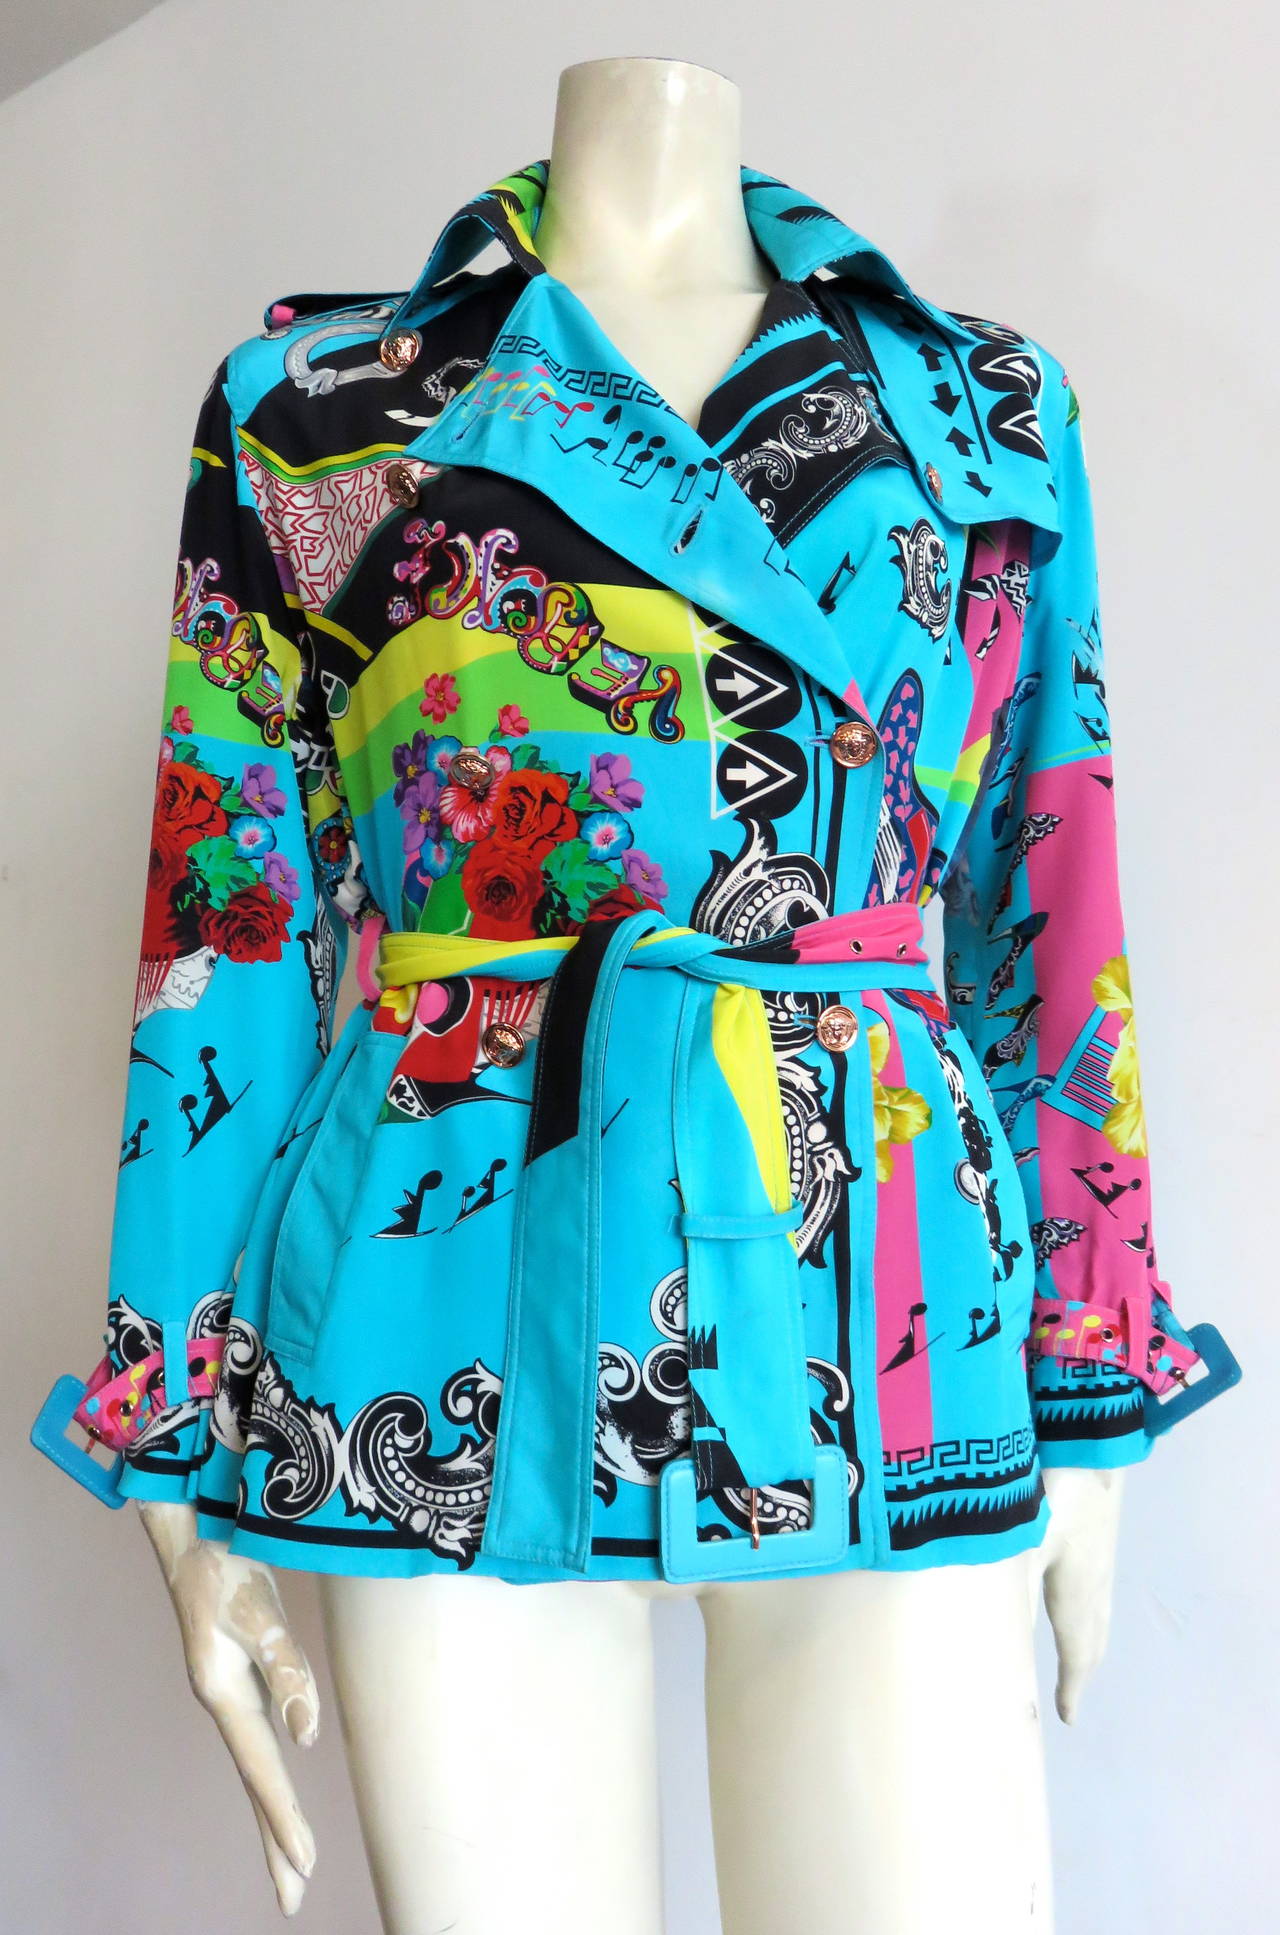 Recent VERSACE 'Music Print', pure silk, belted jacket.

Fabulous, muti-color Versace print featuring music-themed motifs, and floral artworks.  

Light-weight, trench jacket silhouette with belted waist, and cuffs.  Shoulder epaulets. 